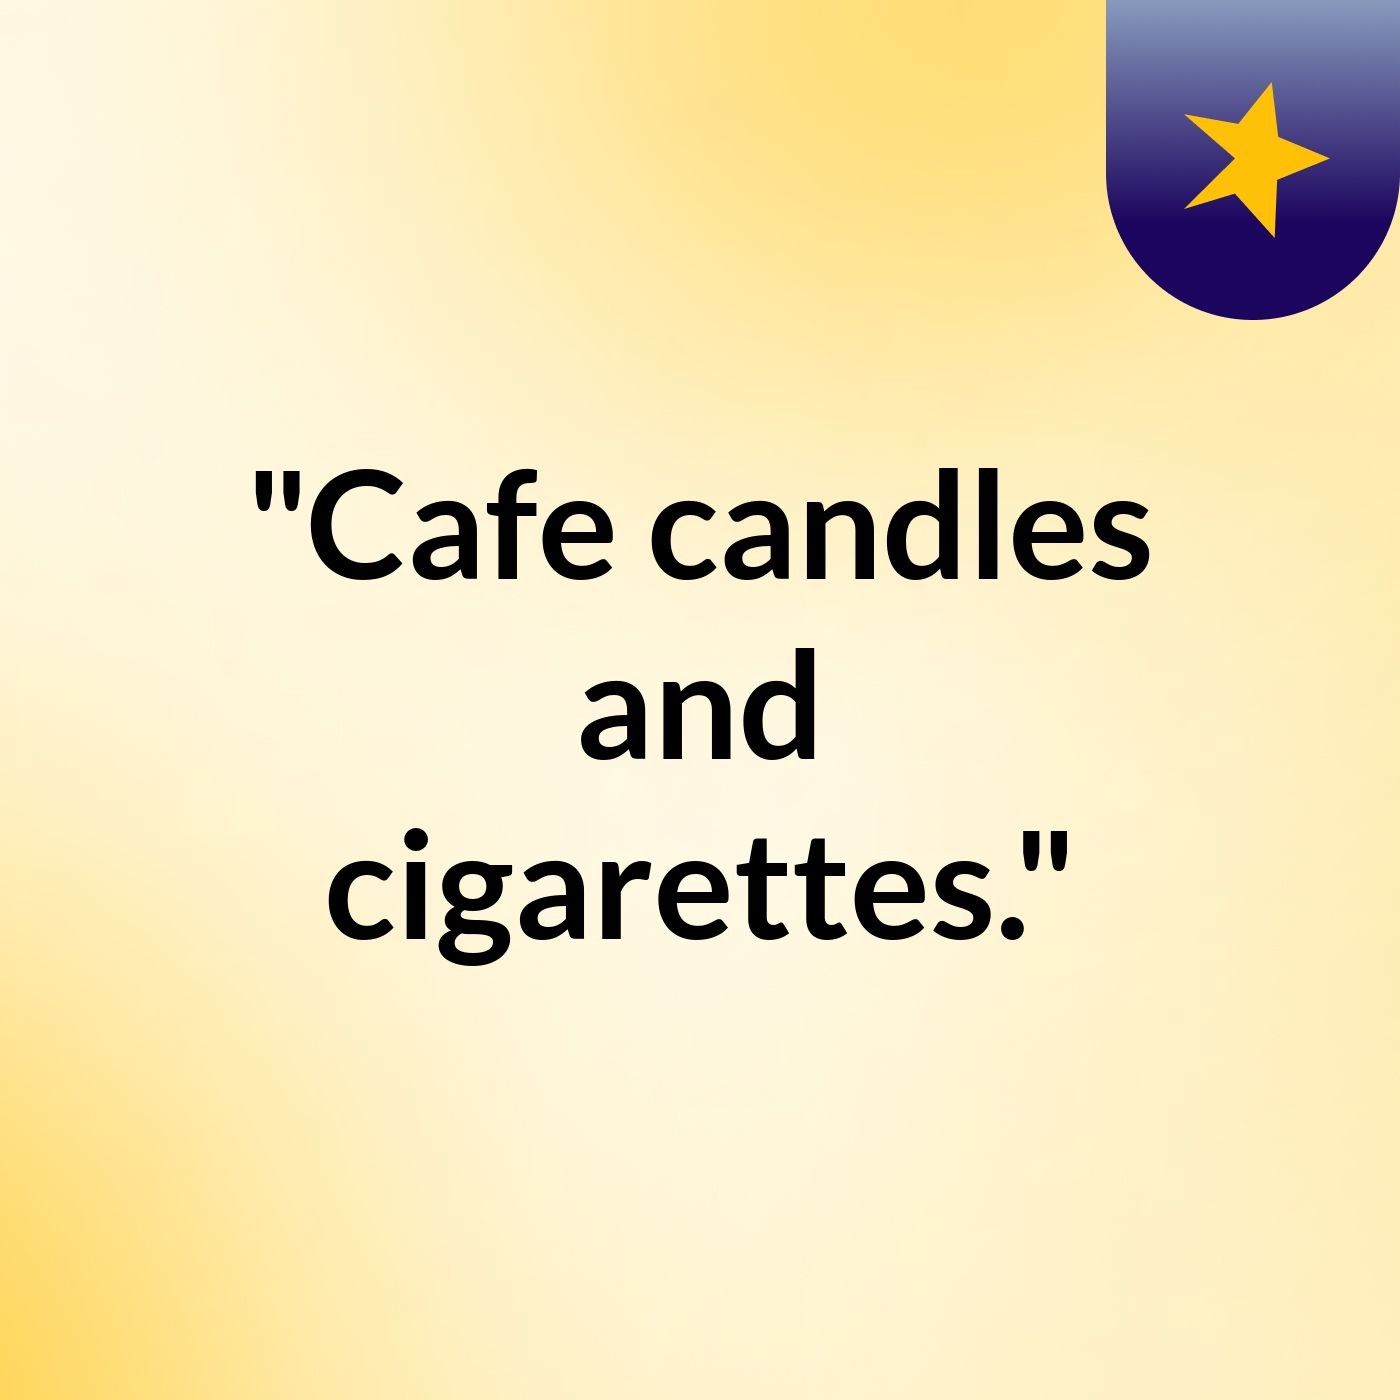 Episode 2 - "Cafe candles and cigarettes."